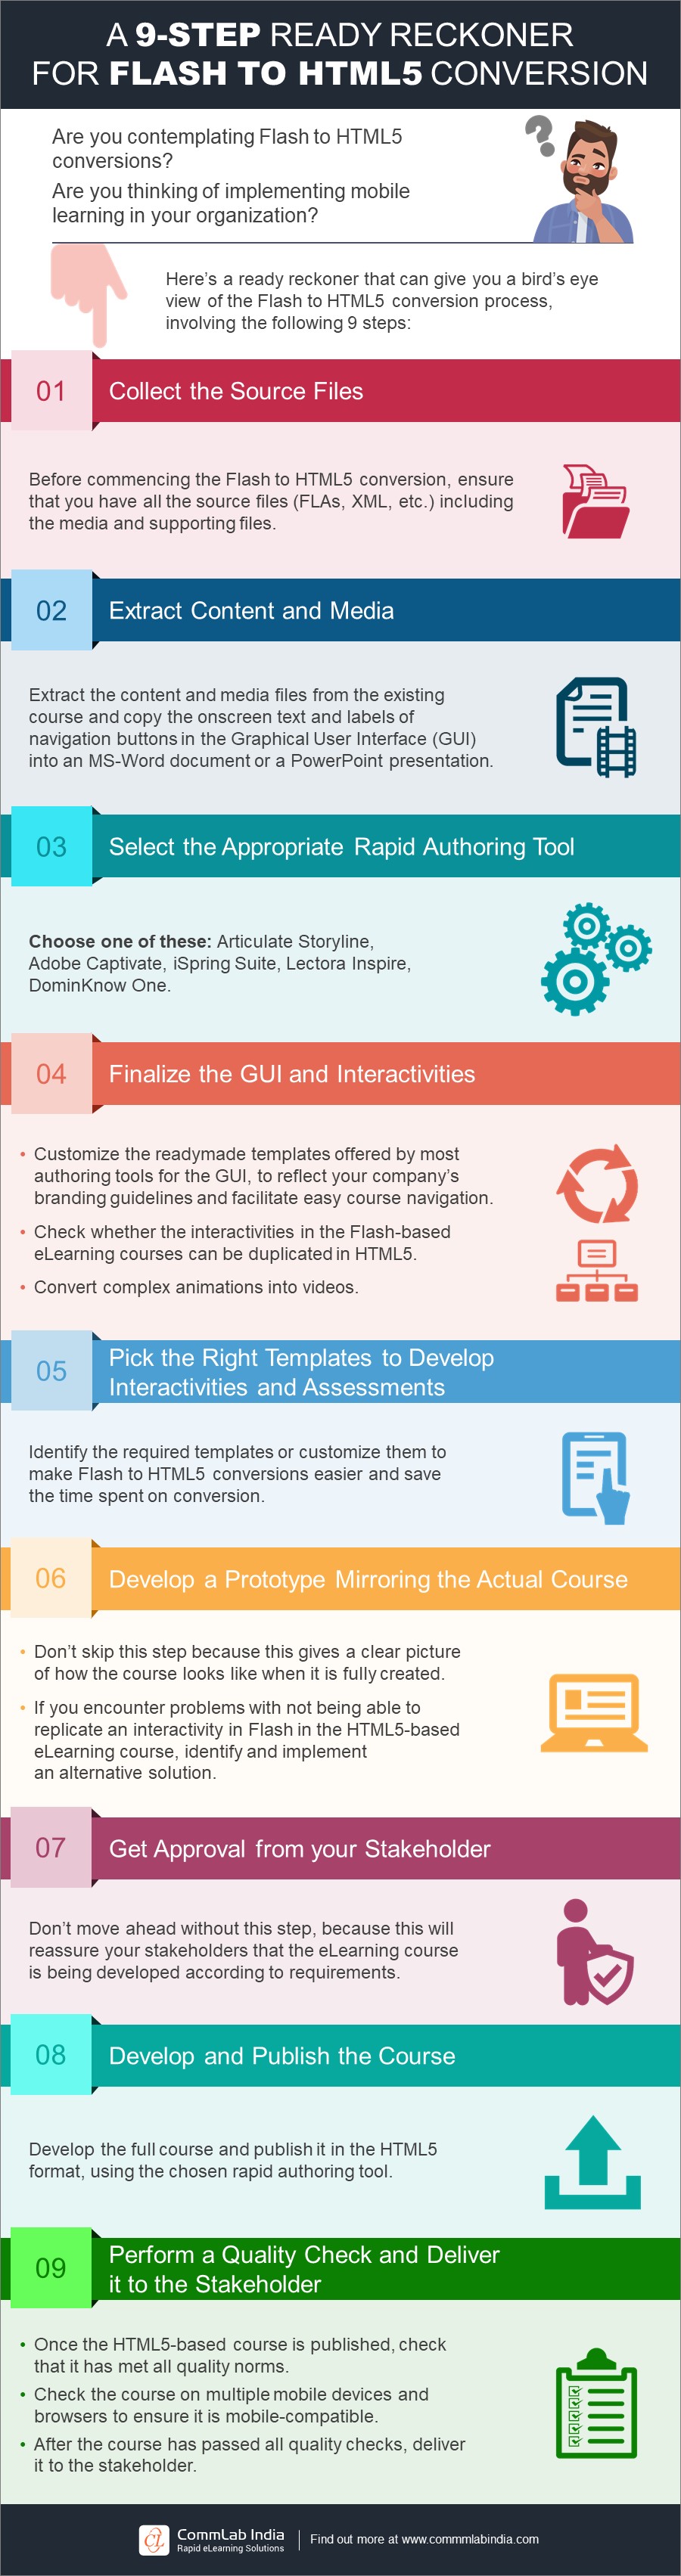 A 9-Step Ready Reckoner to Convert Flash to HTML5 [Infographic]